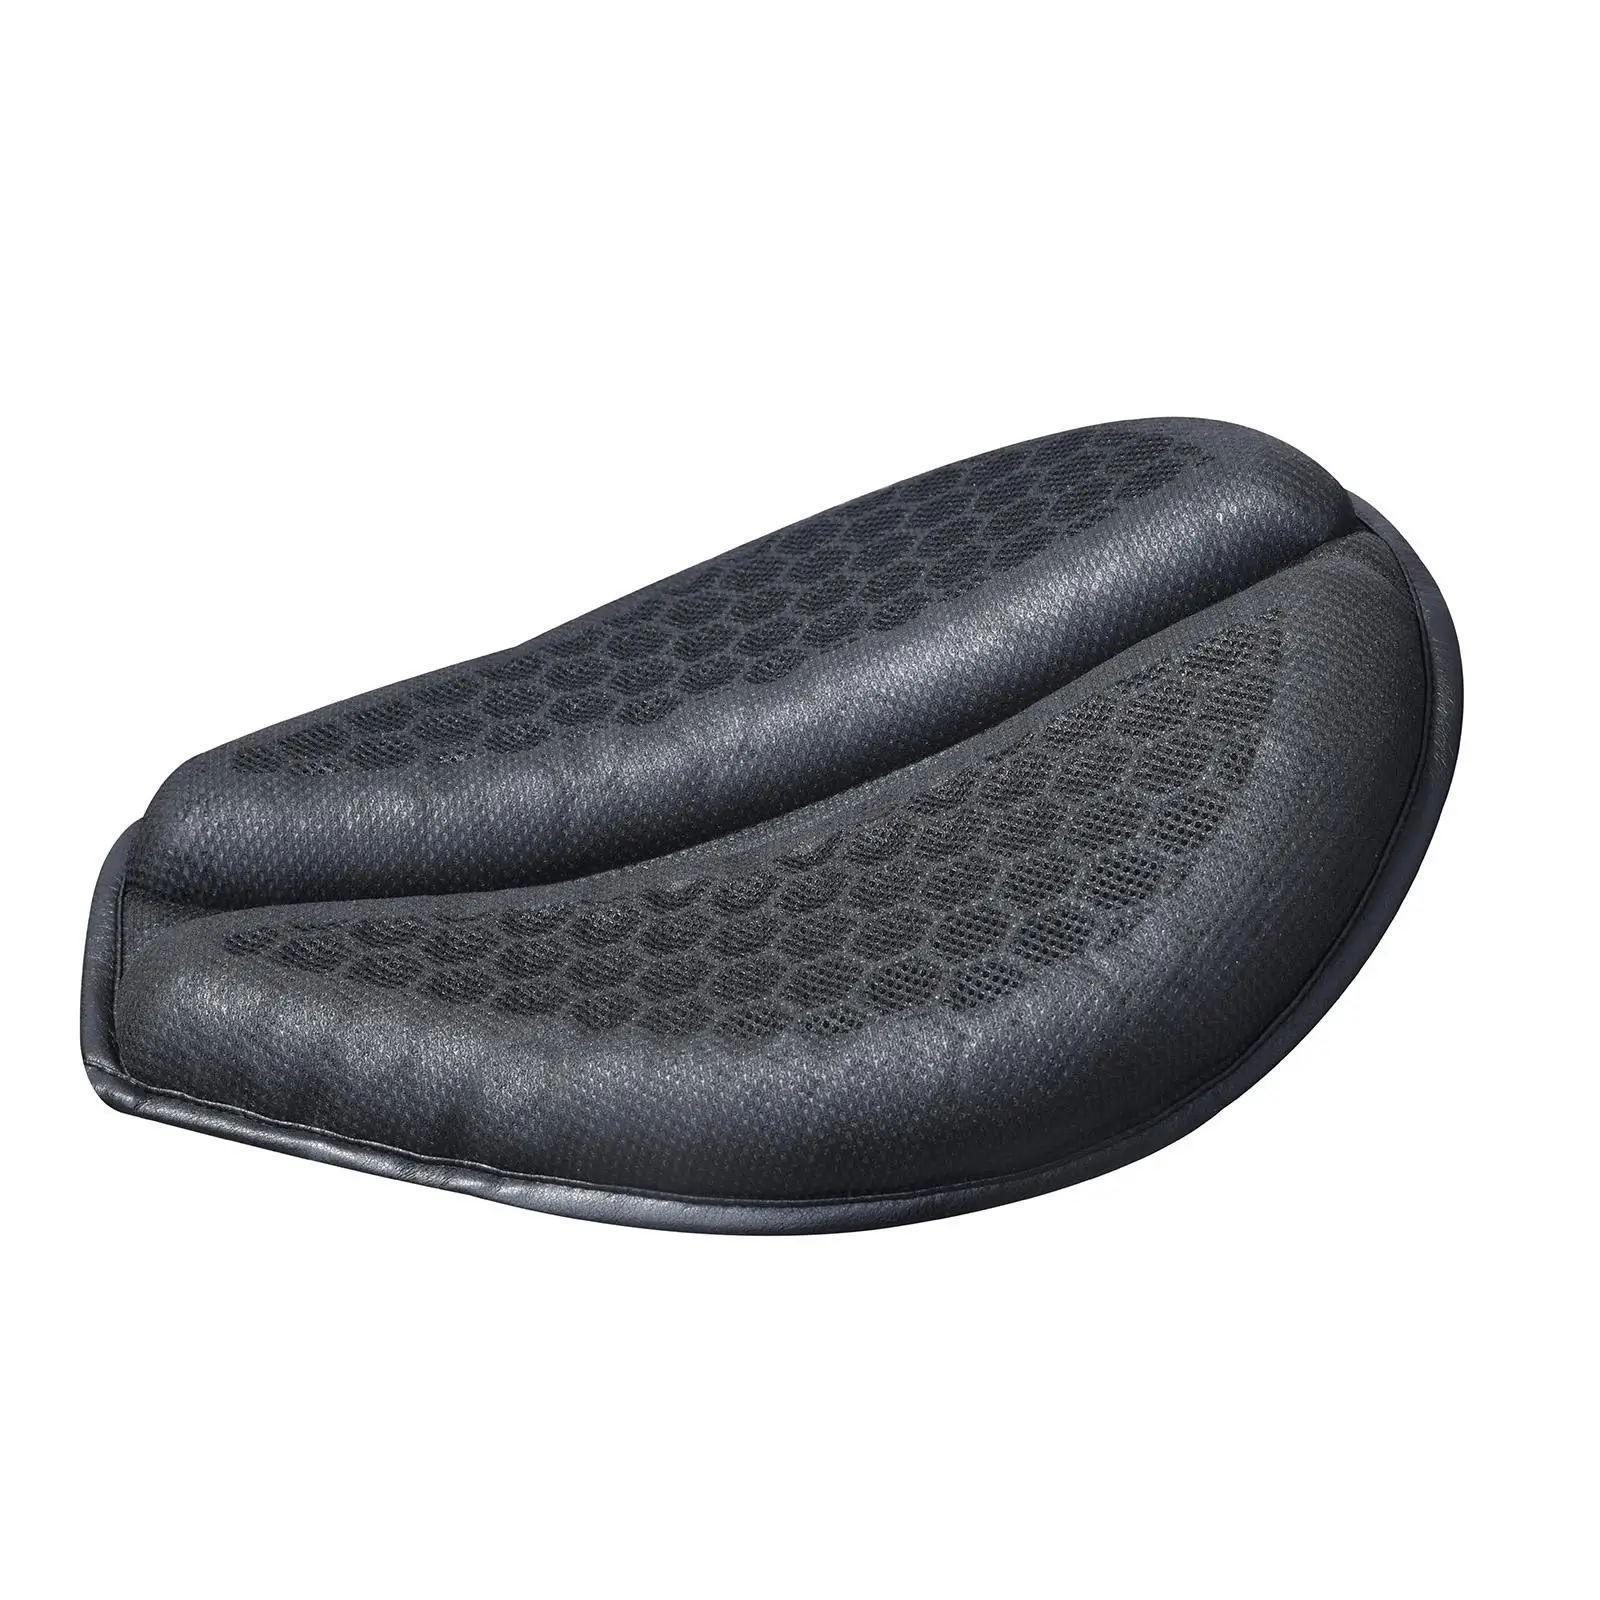 Motorcycle Seat Cushion Cover Shock Absorption Comfortable for Travel